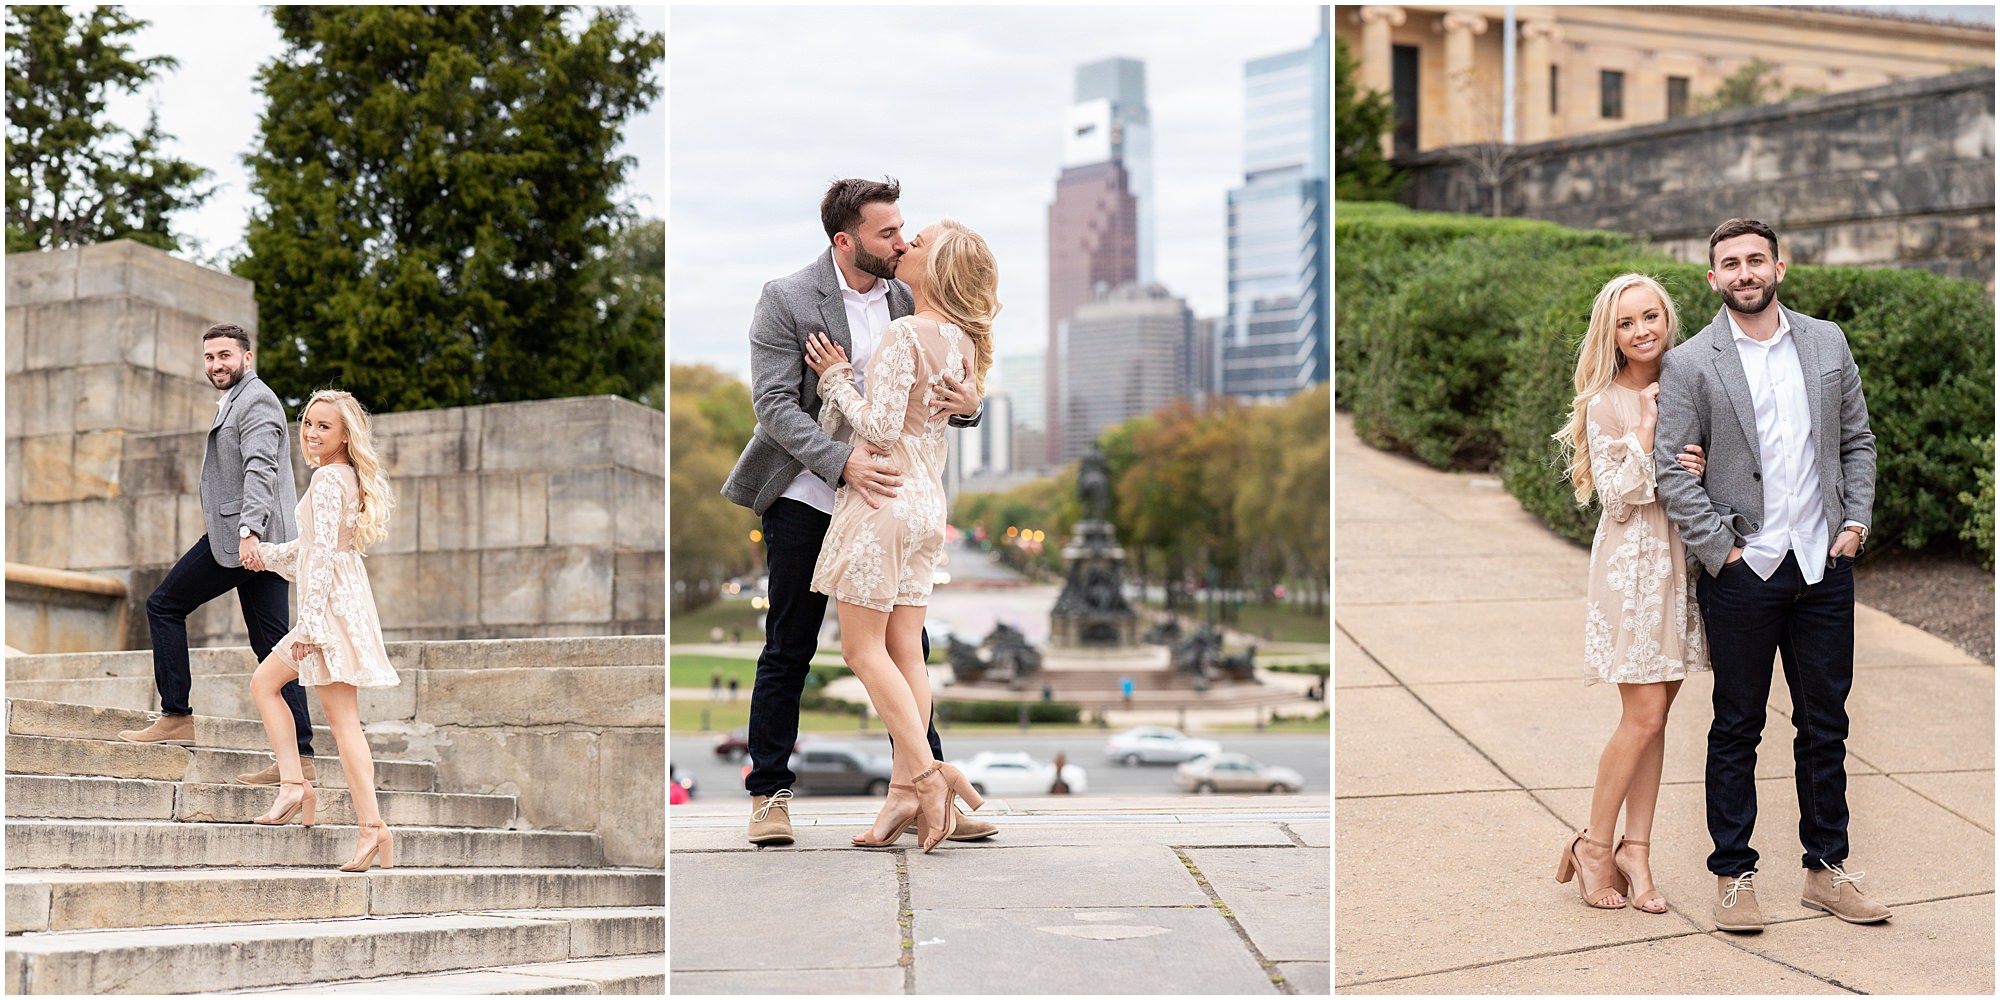 The Philadelphia Museum of Art is an iconic location for your Philadelphia Engagement Photo Session